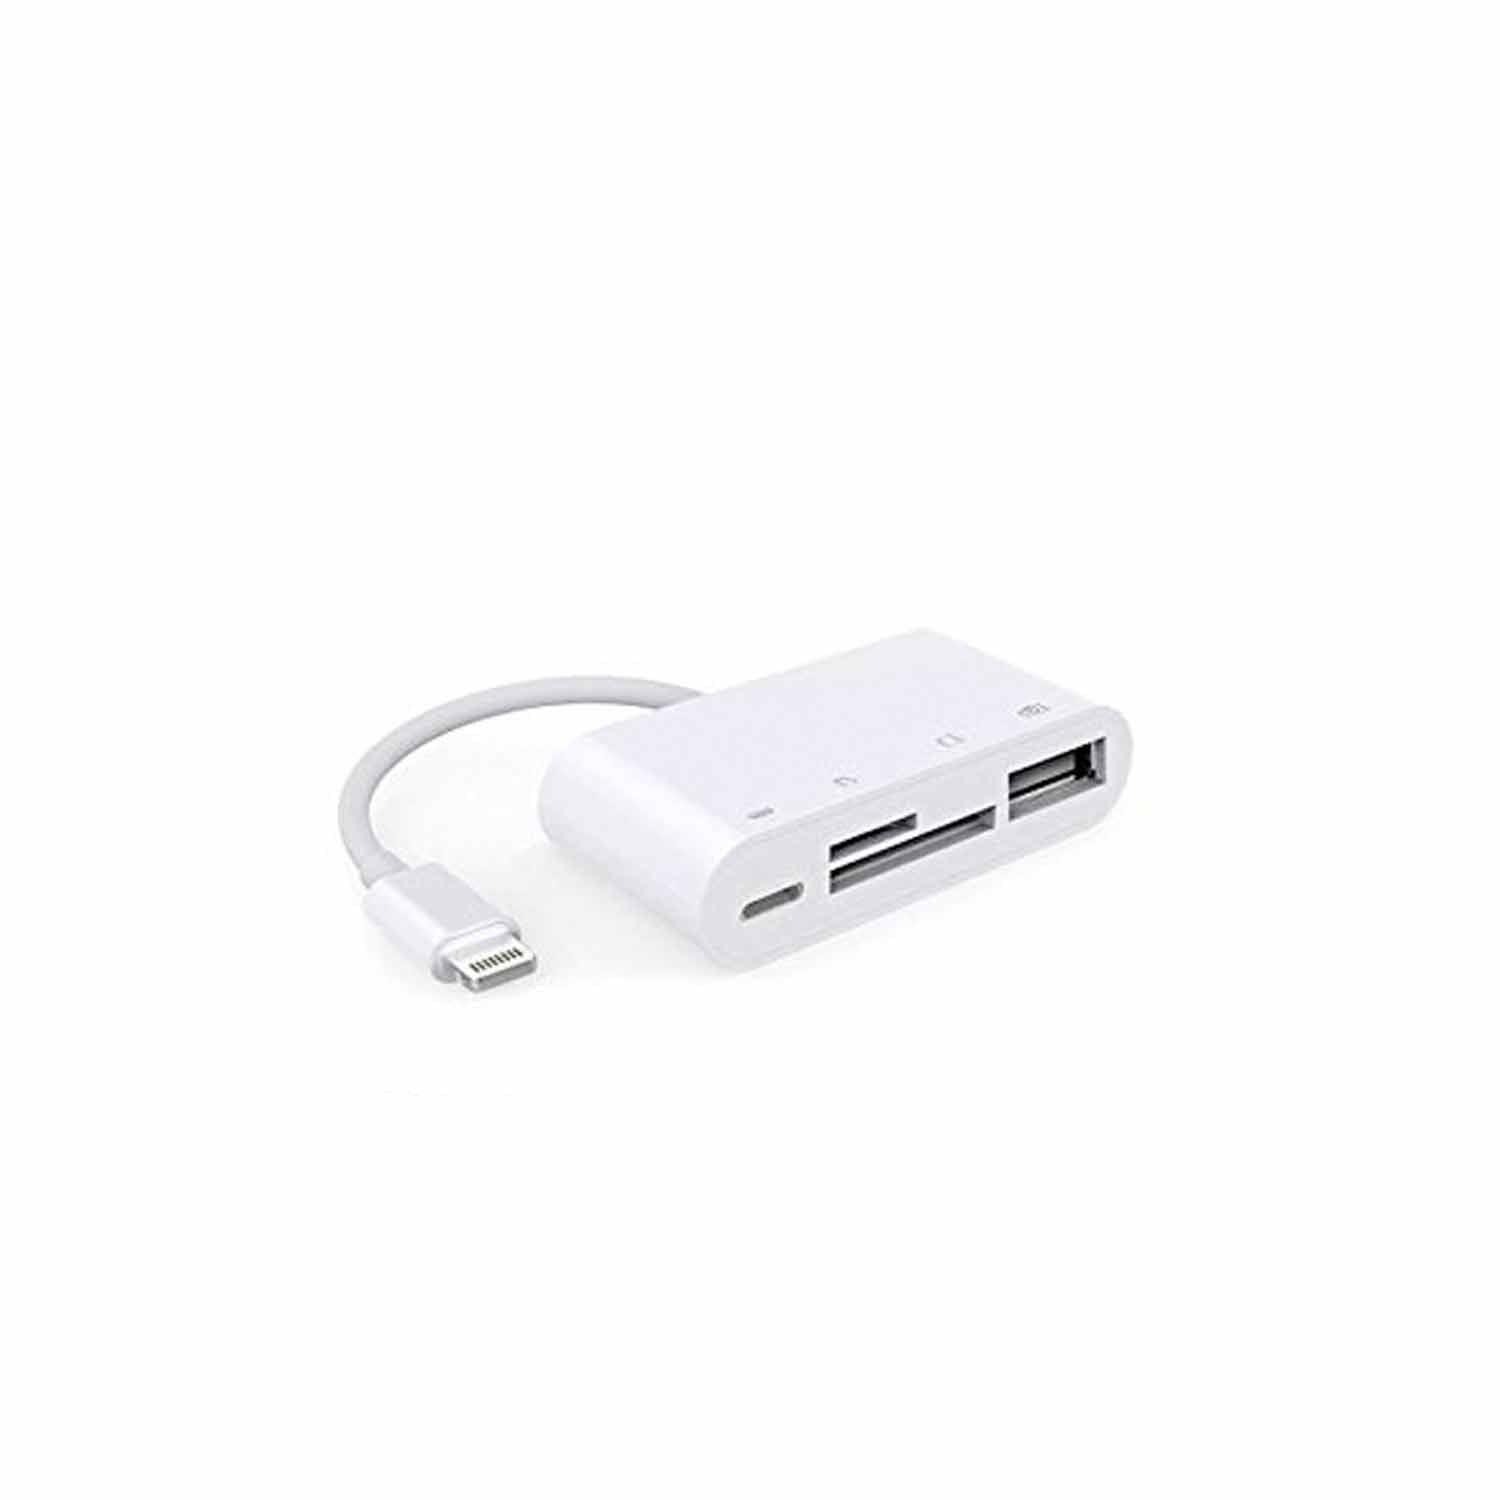 SD Card Reader, Lightning Adapter Cable (for iPhone)